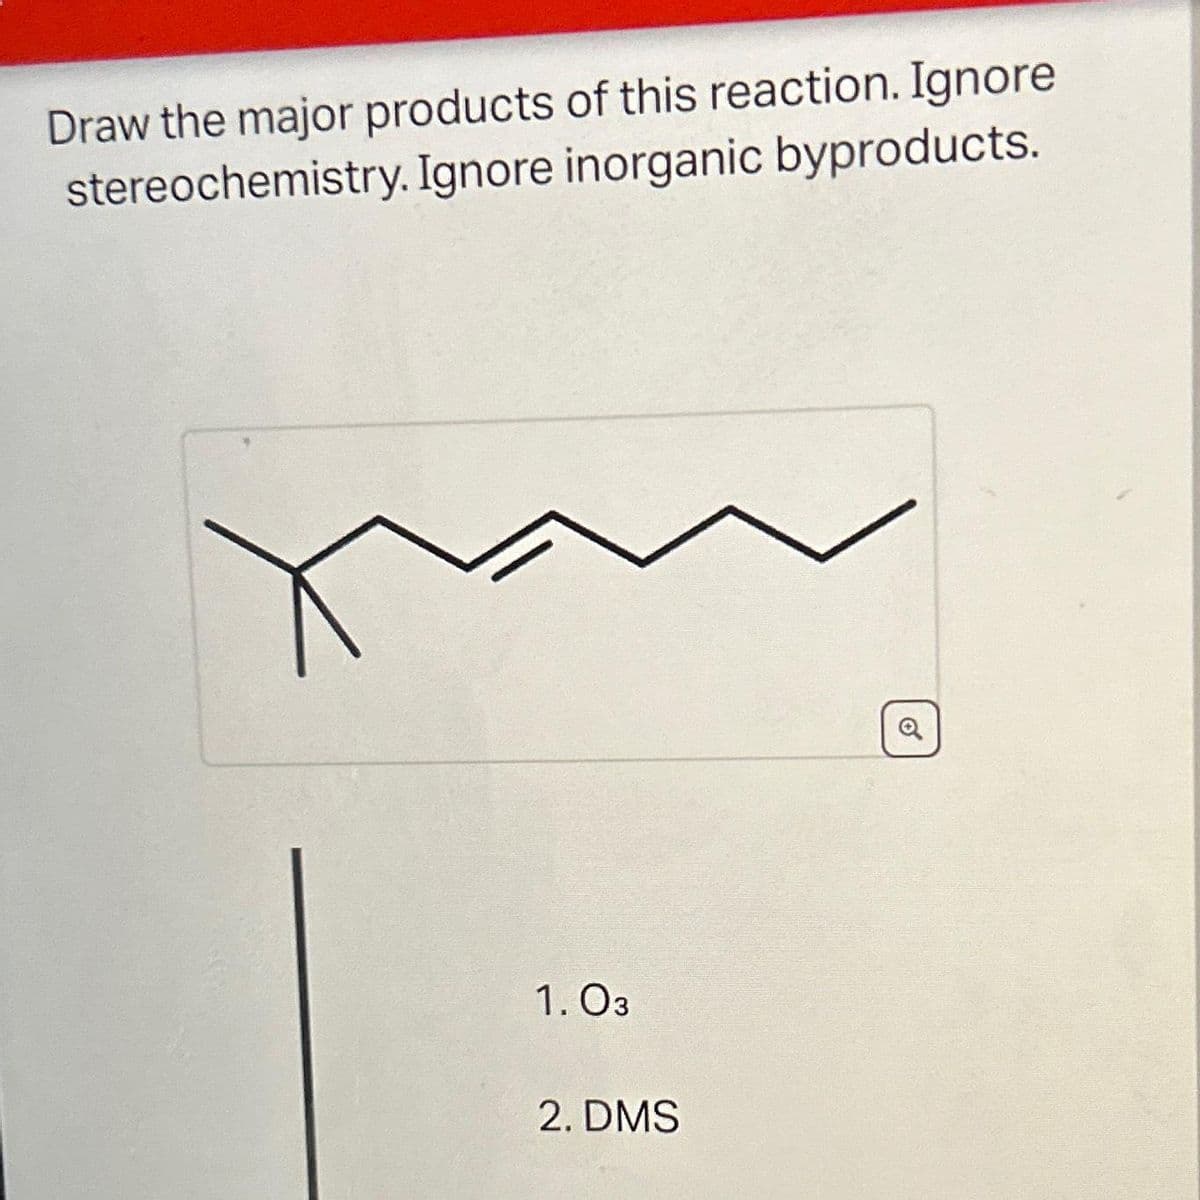 Draw the major products of this reaction. Ignore
stereochemistry. Ignore inorganic byproducts.
1.03
2. DMS